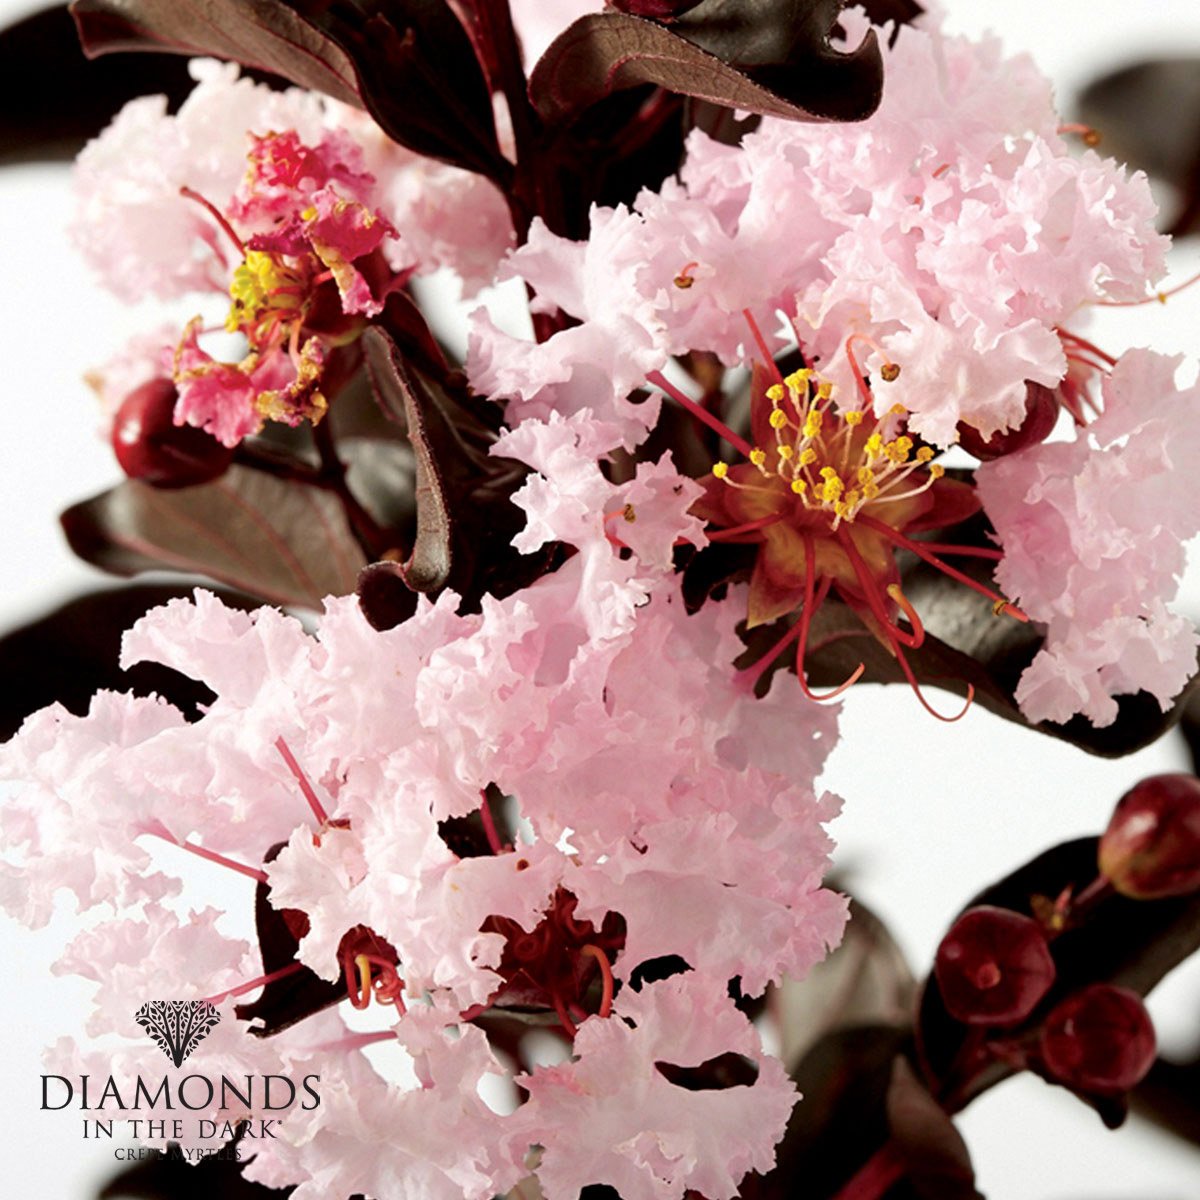 Lagerstroemia Diamonds in the Dark® 'Blush' has stunning near-black foliage crowned with masses of soft baby pink flowers